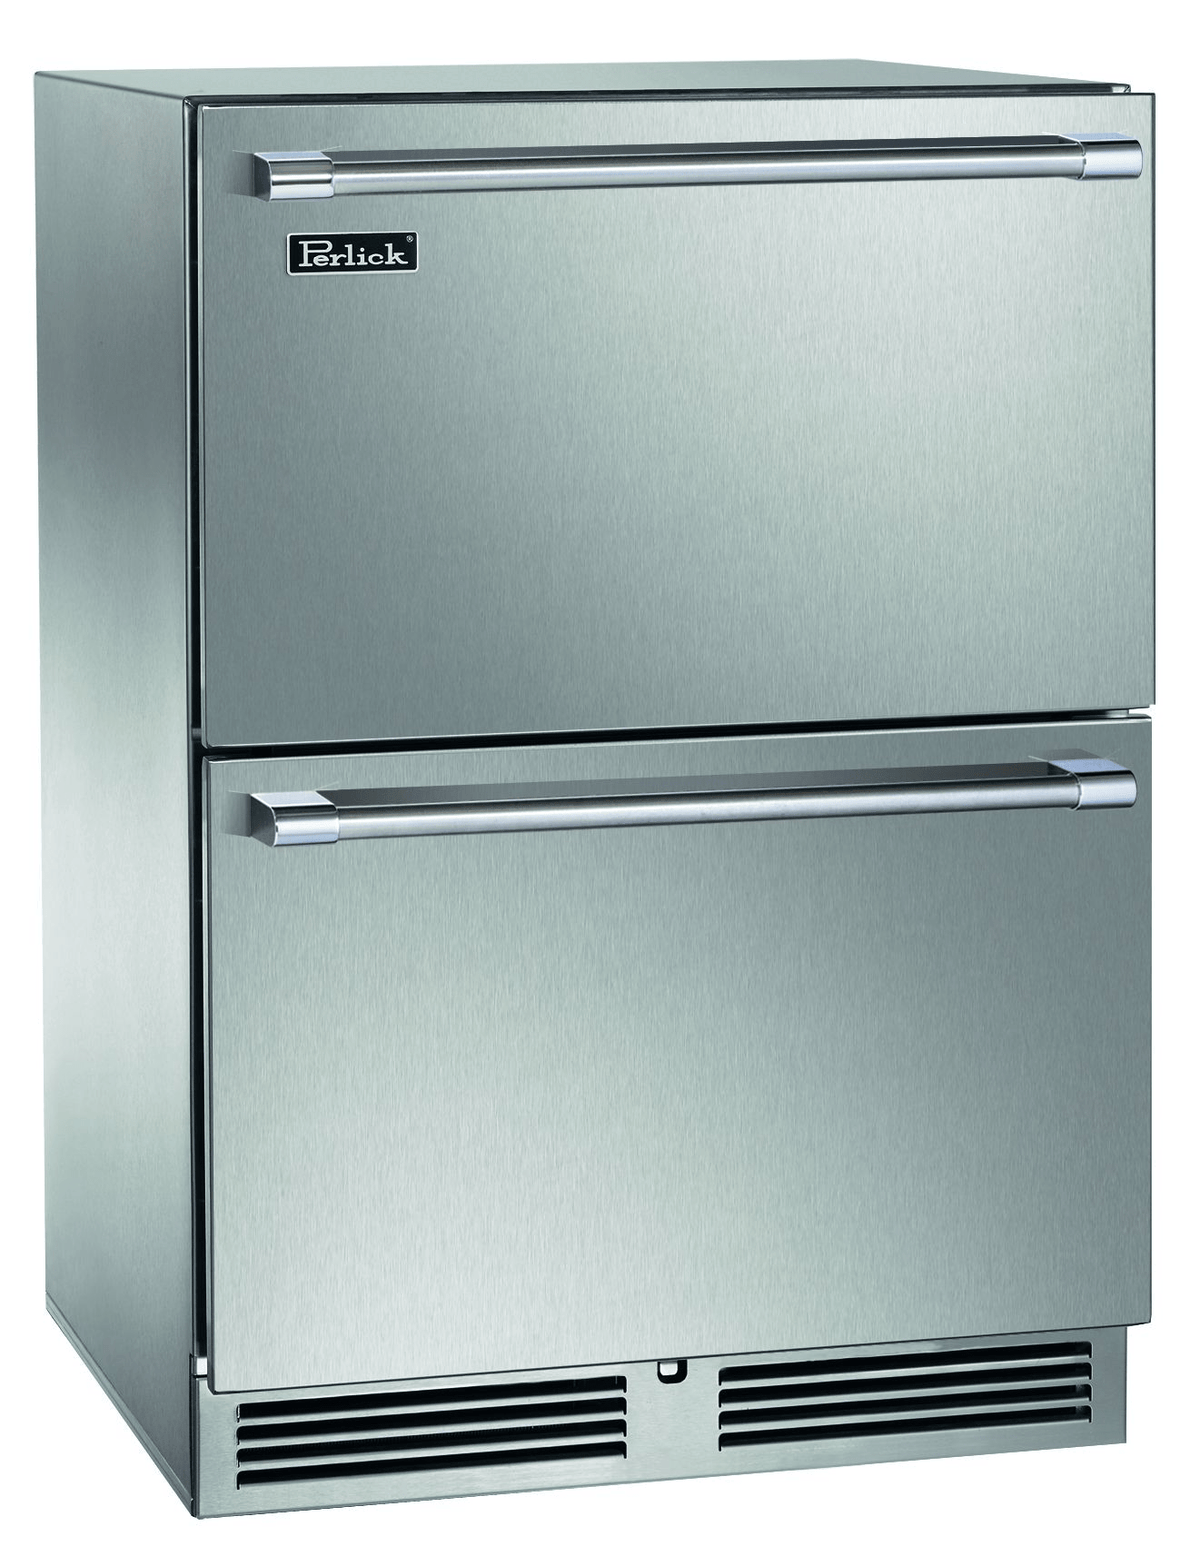 Perlick Refrigeration + Cooling Stainless Steel Drawers Perlick 24&quot; Signature Series Freezer Drawers / HP24FO-4 Drawers